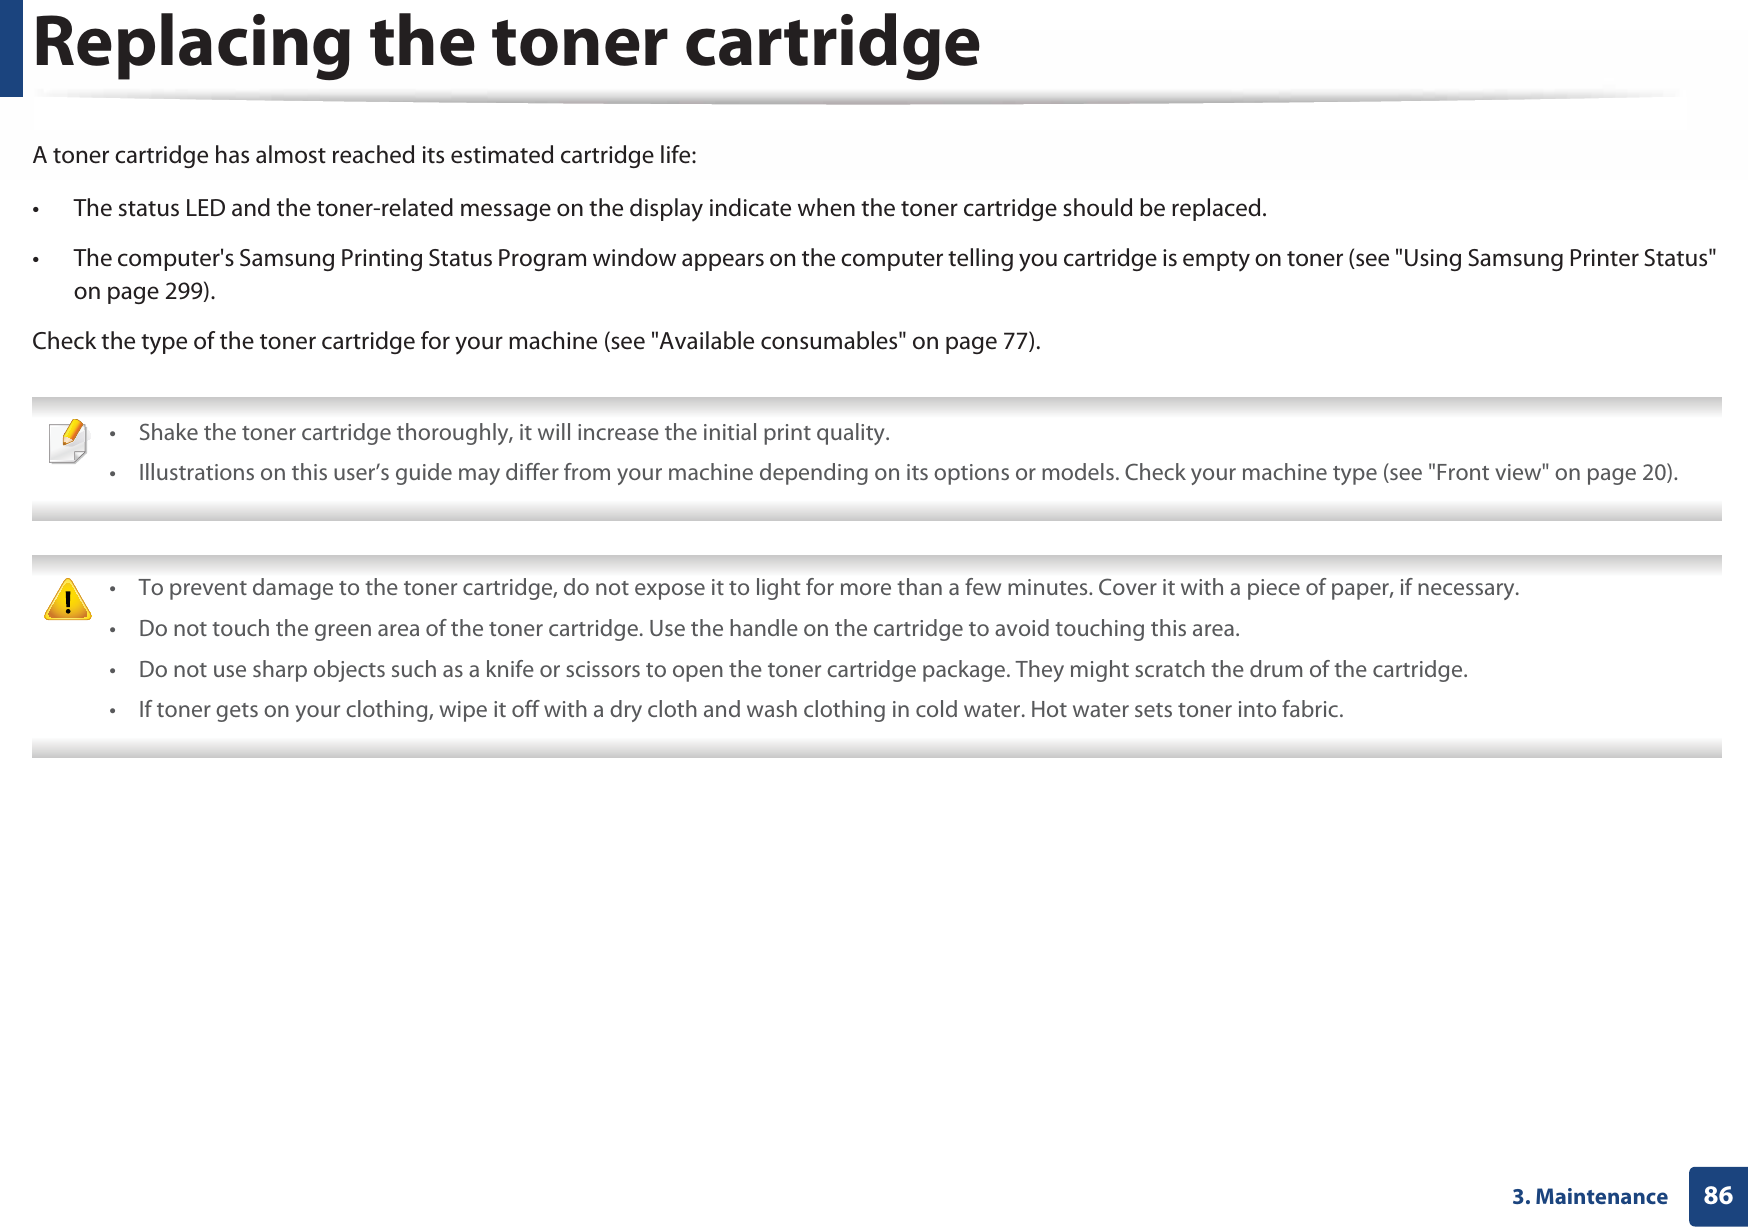 863. MaintenanceReplacing the toner cartridgeA toner cartridge has almost reached its estimated cartridge life:• The status LED and the toner-related message on the display indicate when the toner cartridge should be replaced.• The computer&apos;s Samsung Printing Status Program window appears on the computer telling you cartridge is empty on toner (see &quot;Using Samsung Printer Status&quot; on page 299).Check the type of the toner cartridge for your machine (see &quot;Available consumables&quot; on page 77). • Shake the toner cartridge thoroughly, it will increase the initial print quality.• Illustrations on this user’s guide may differ from your machine depending on its options or models. Check your machine type (see &quot;Front view&quot; on page 20).  • To prevent damage to the toner cartridge, do not expose it to light for more than a few minutes. Cover it with a piece of paper, if necessary. • Do not touch the green area of the toner cartridge. Use the handle on the cartridge to avoid touching this area. • Do not use sharp objects such as a knife or scissors to open the toner cartridge package. They might scratch the drum of the cartridge.• If toner gets on your clothing, wipe it off with a dry cloth and wash clothing in cold water. Hot water sets toner into fabric. 